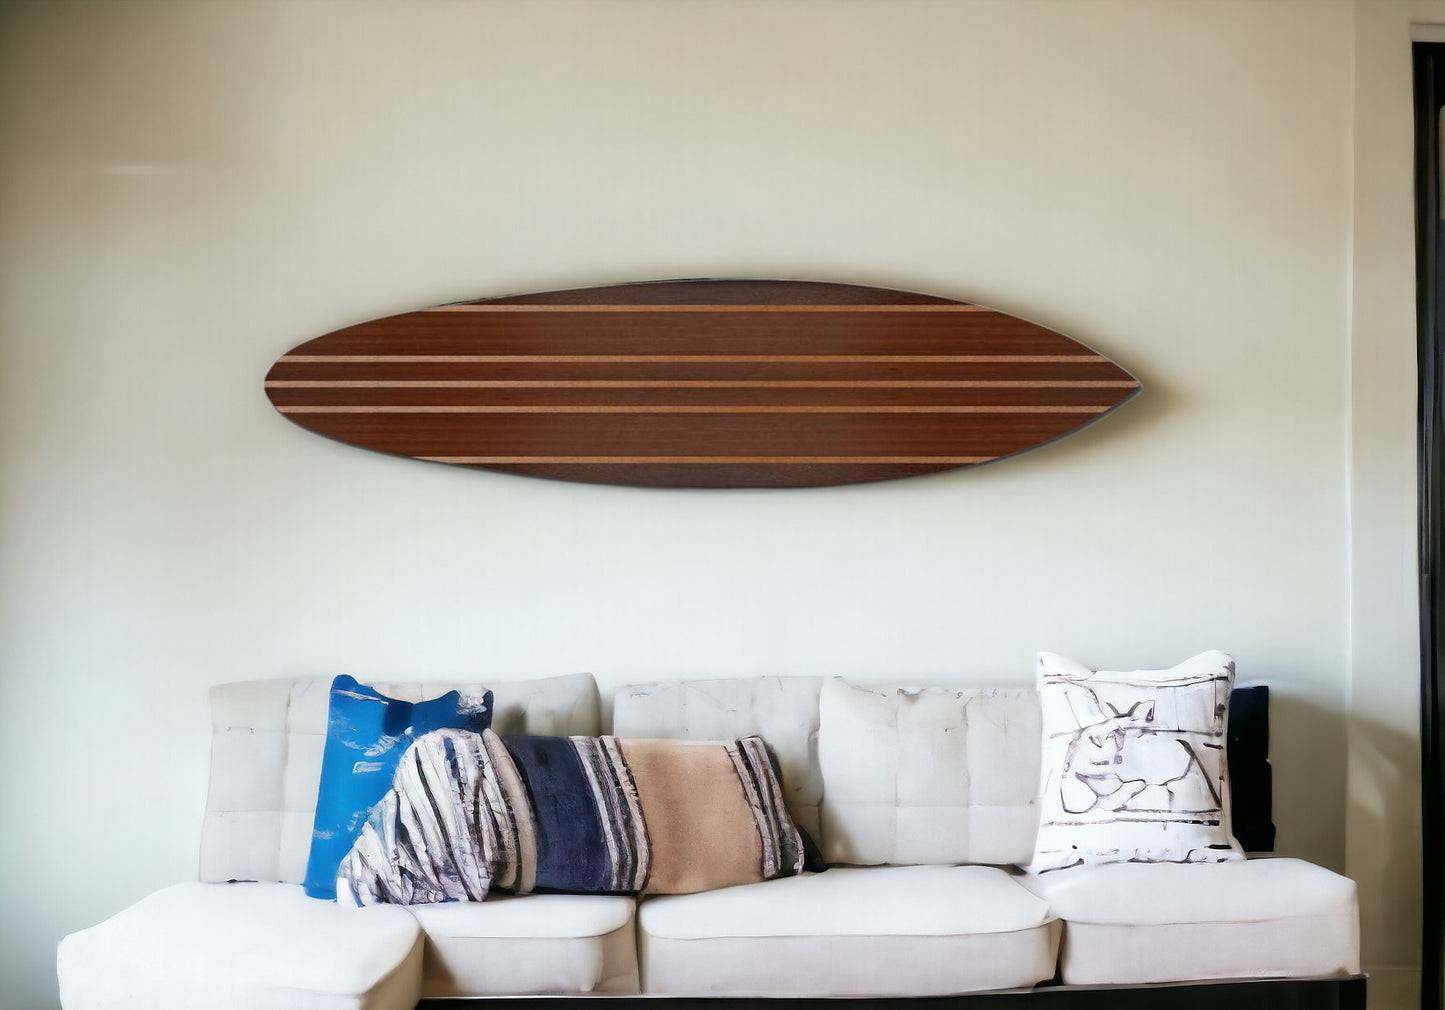 76" X 18" Brown Wood Surfing Wall Decor